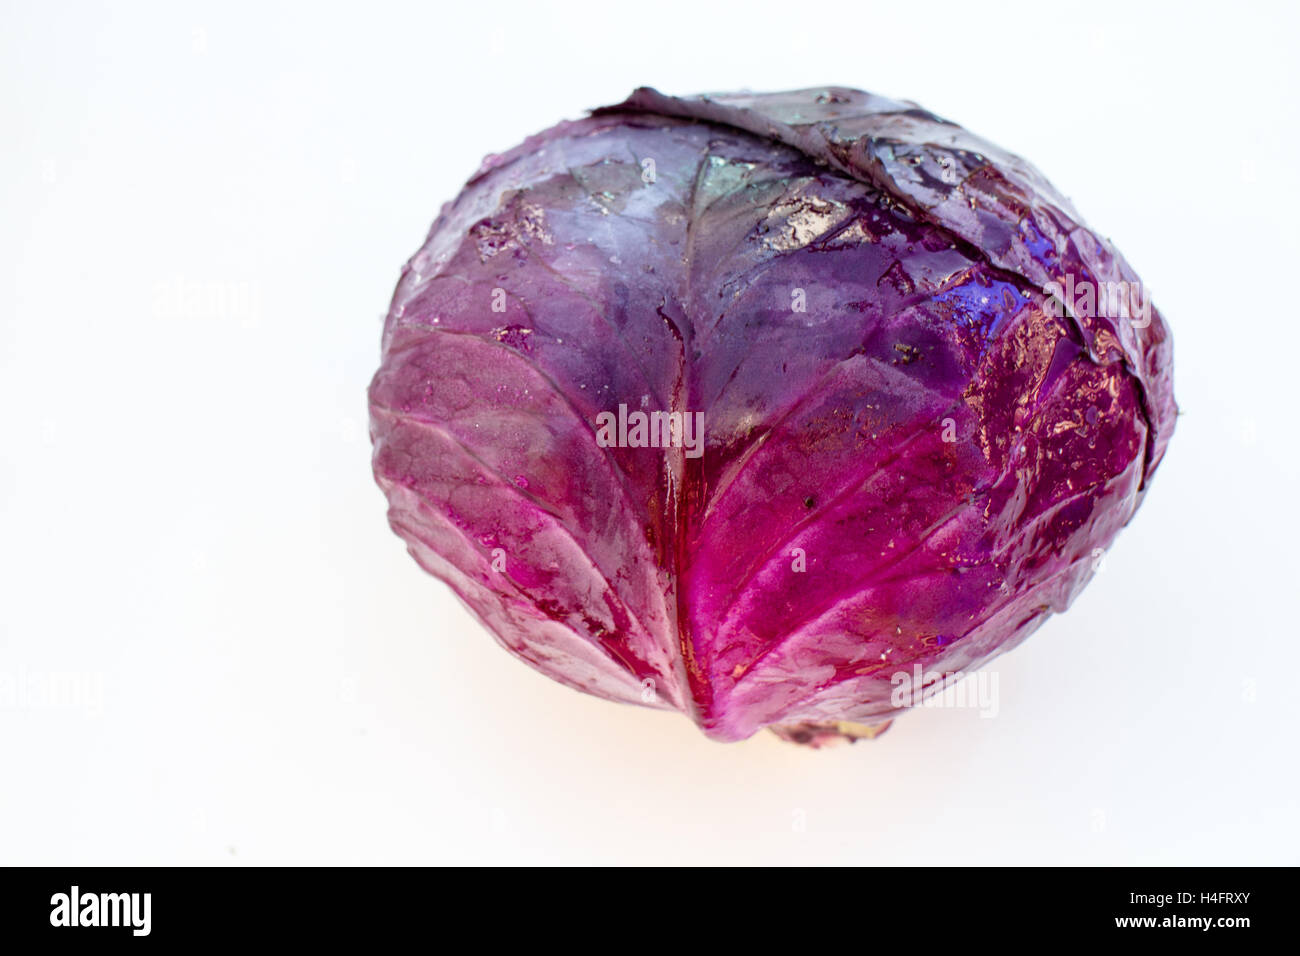 A head of purple cabbage to be used in a recipe for food, food inspired Stock Photo